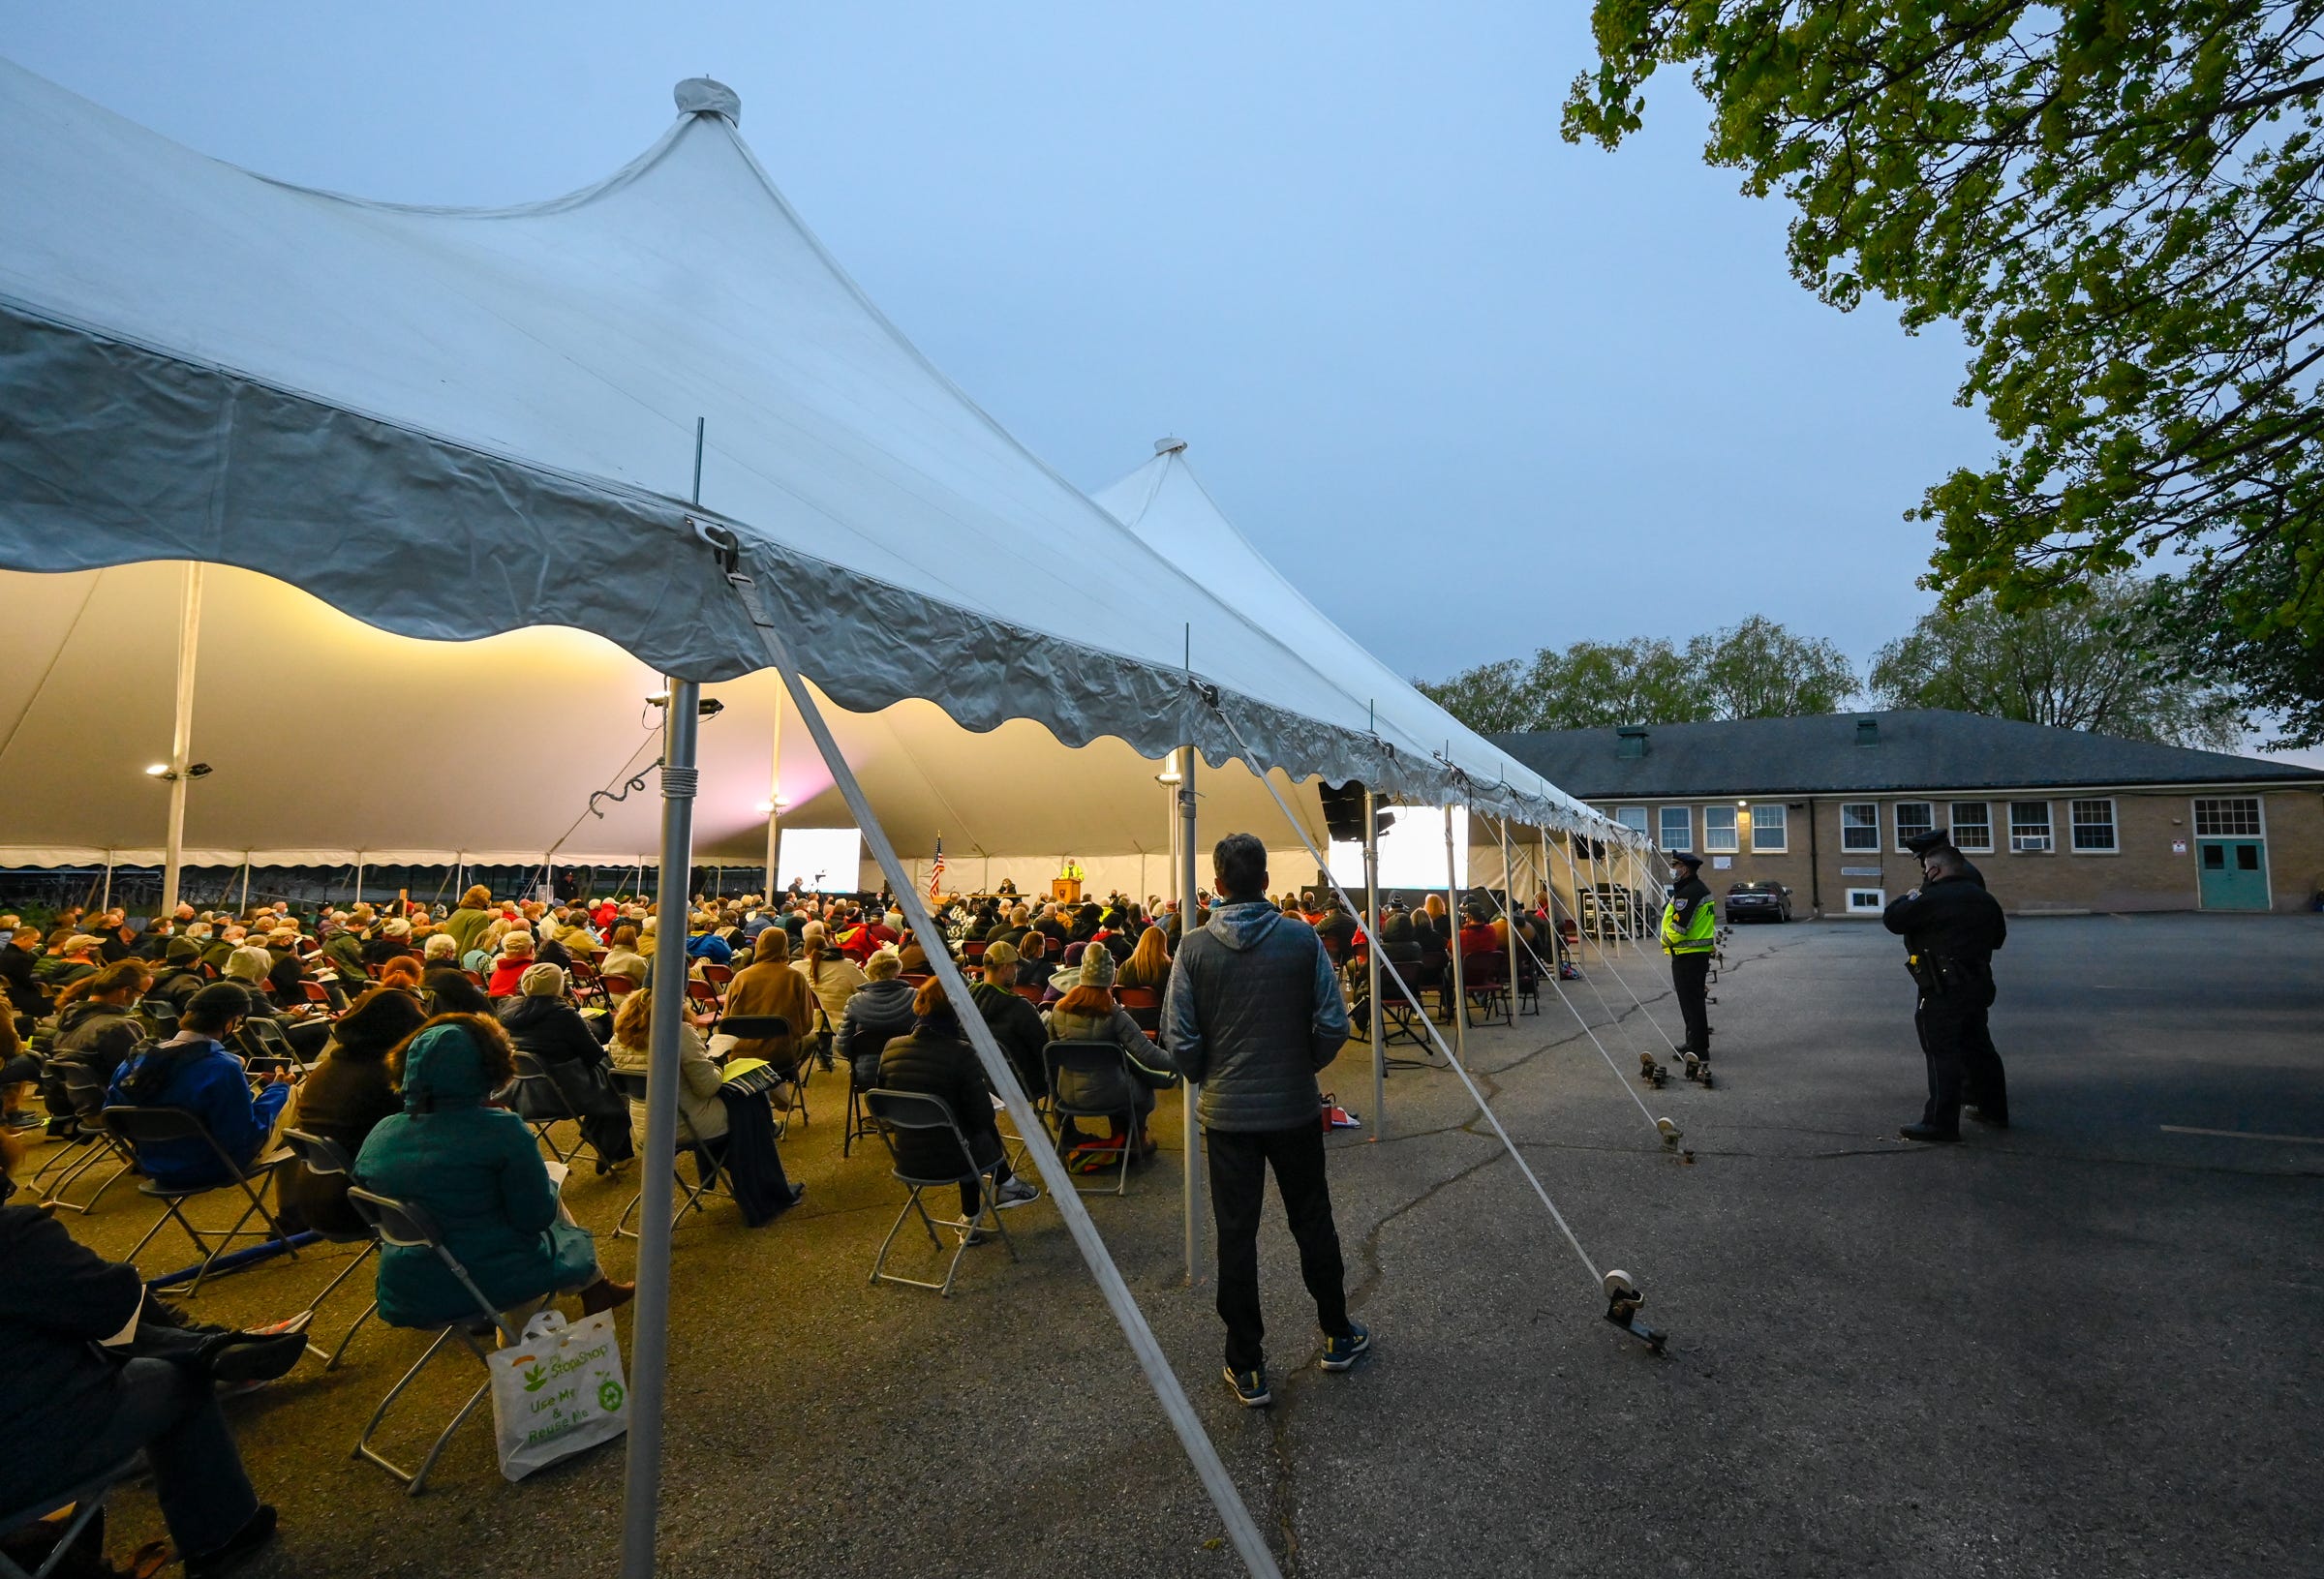 49 articles, 1 night = Town Meeting in Marblehead